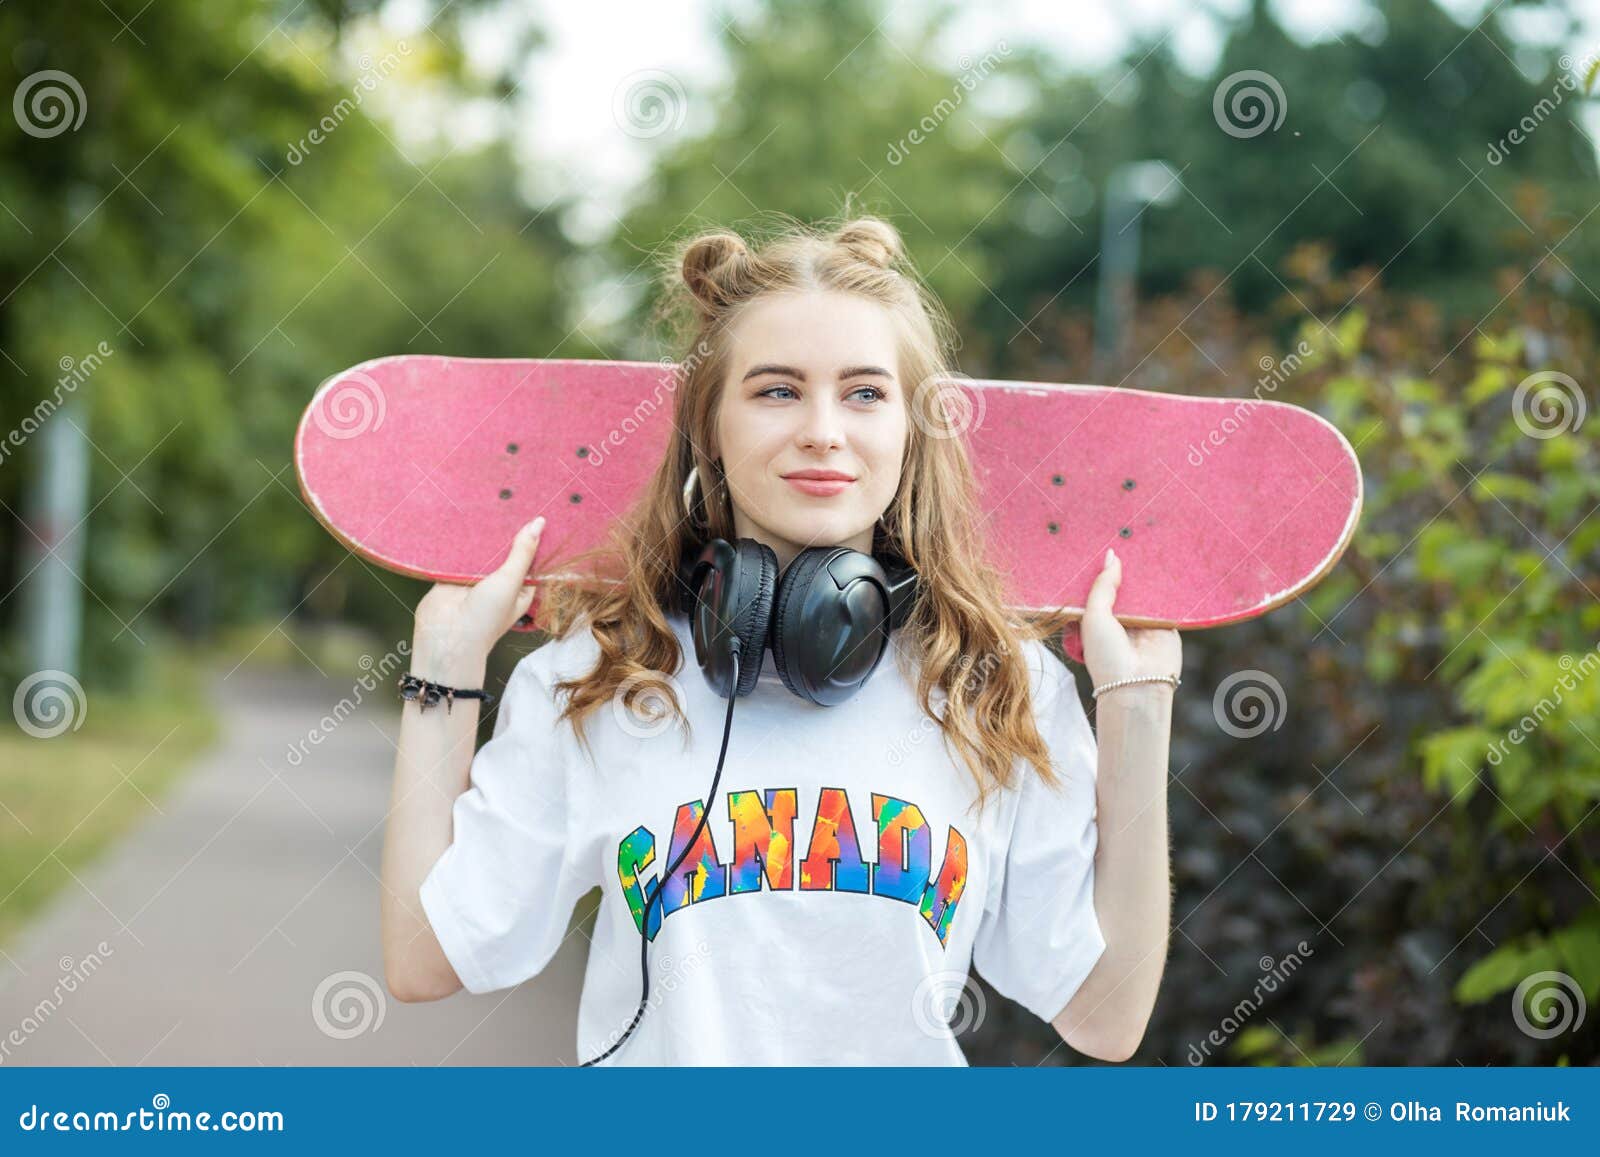 Young Teenager Girl with a Skateboard. Headphones. the Concept of an ...